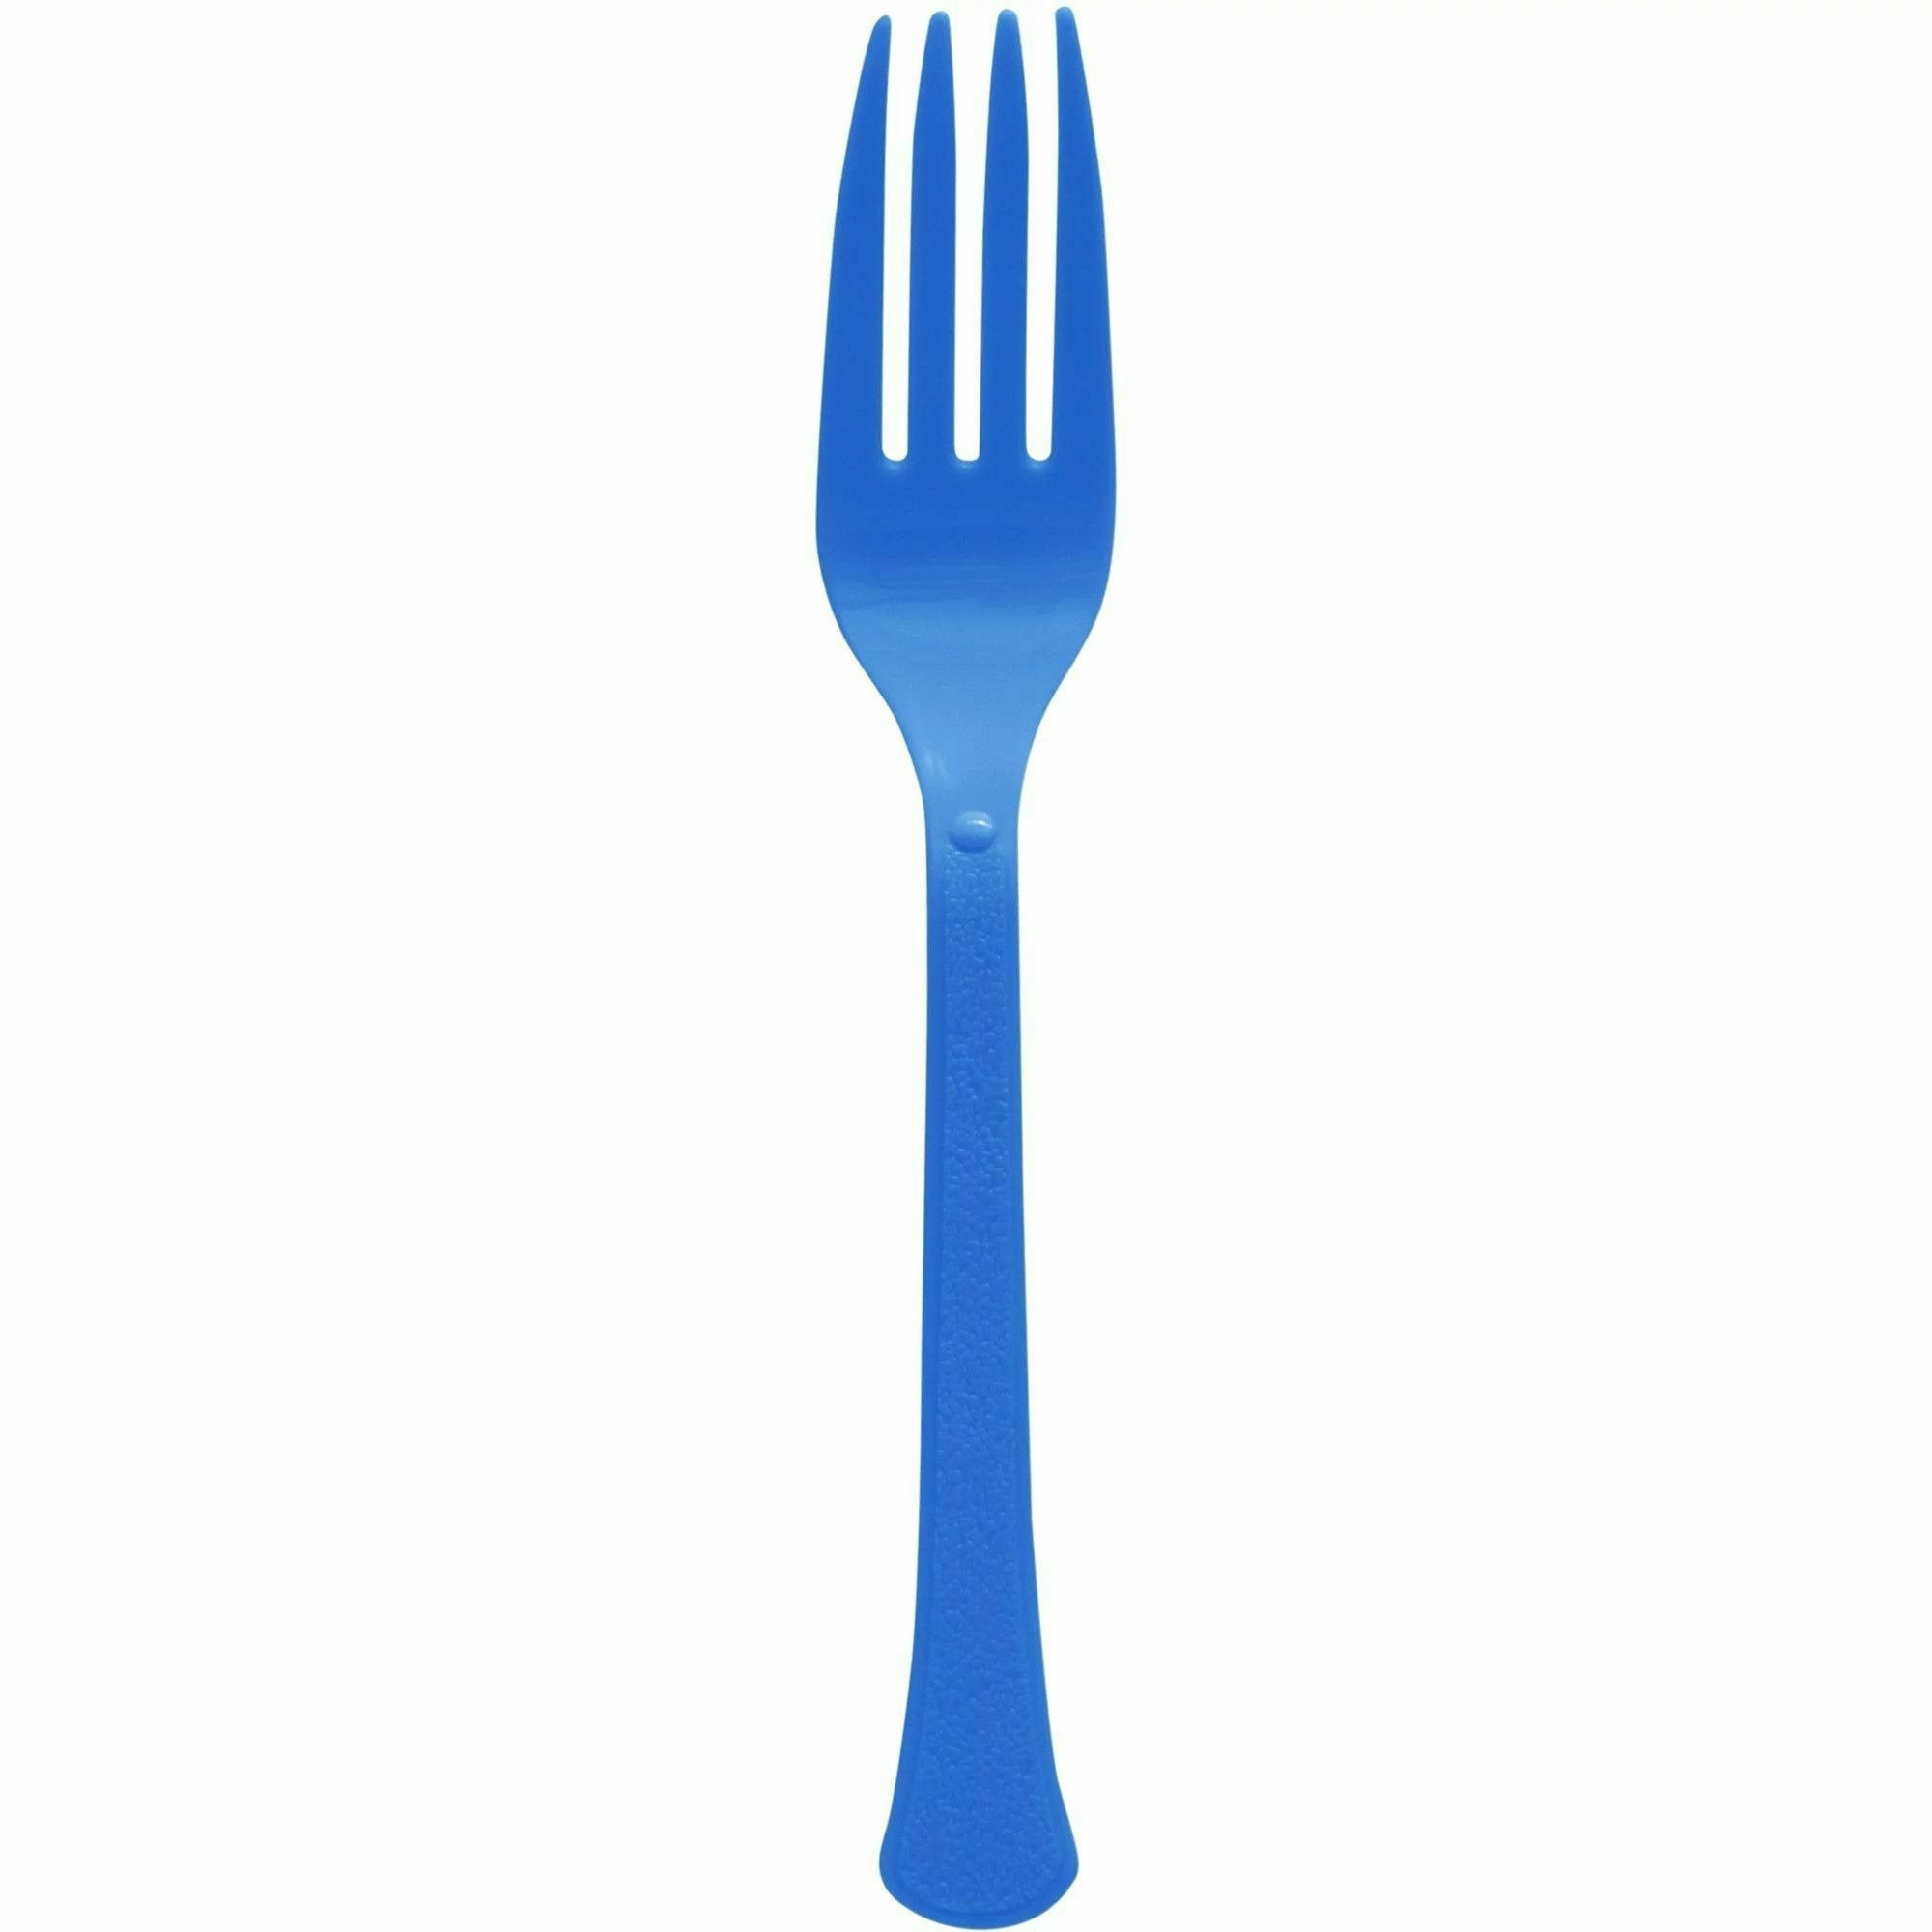 Amscan BASIC Bright Royal Blue - Boxed, Heavy Weight Forks, High Ct.